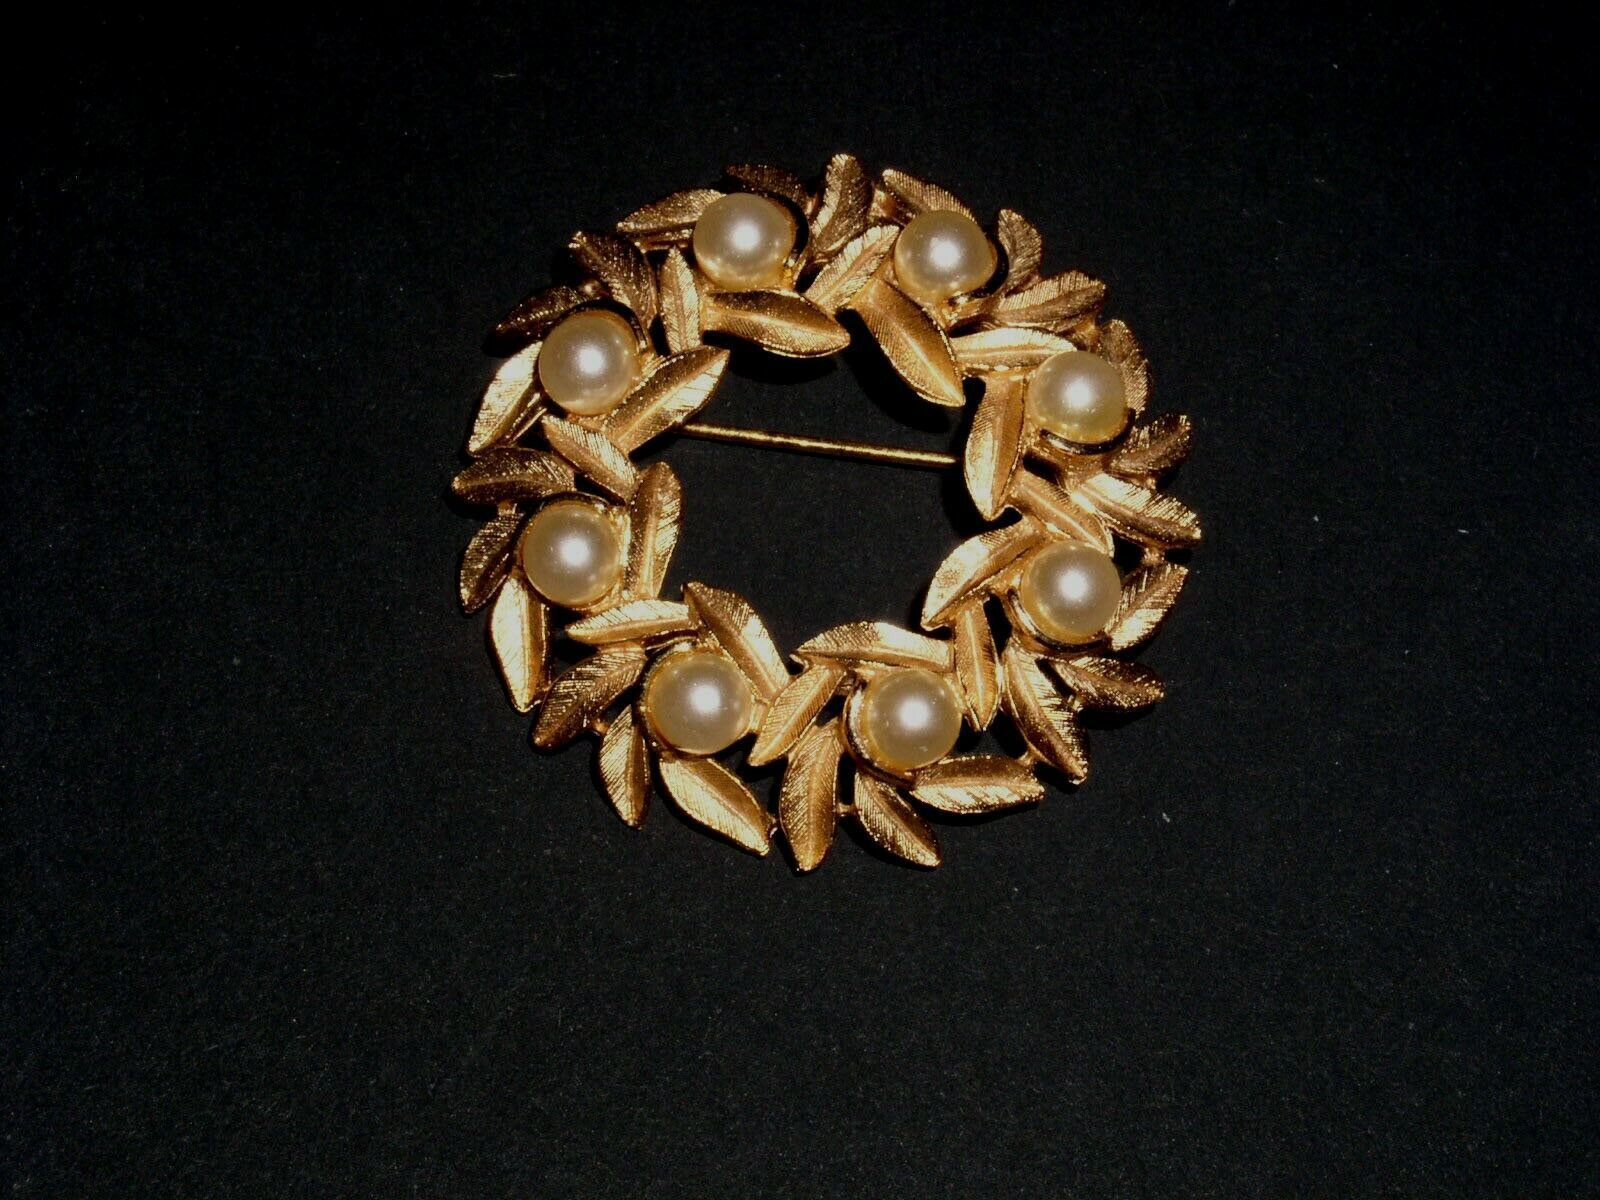 Primary image for Avon Pearl Gold Wreath Brooch Costume Jewelry Vintage 1950's 1960's